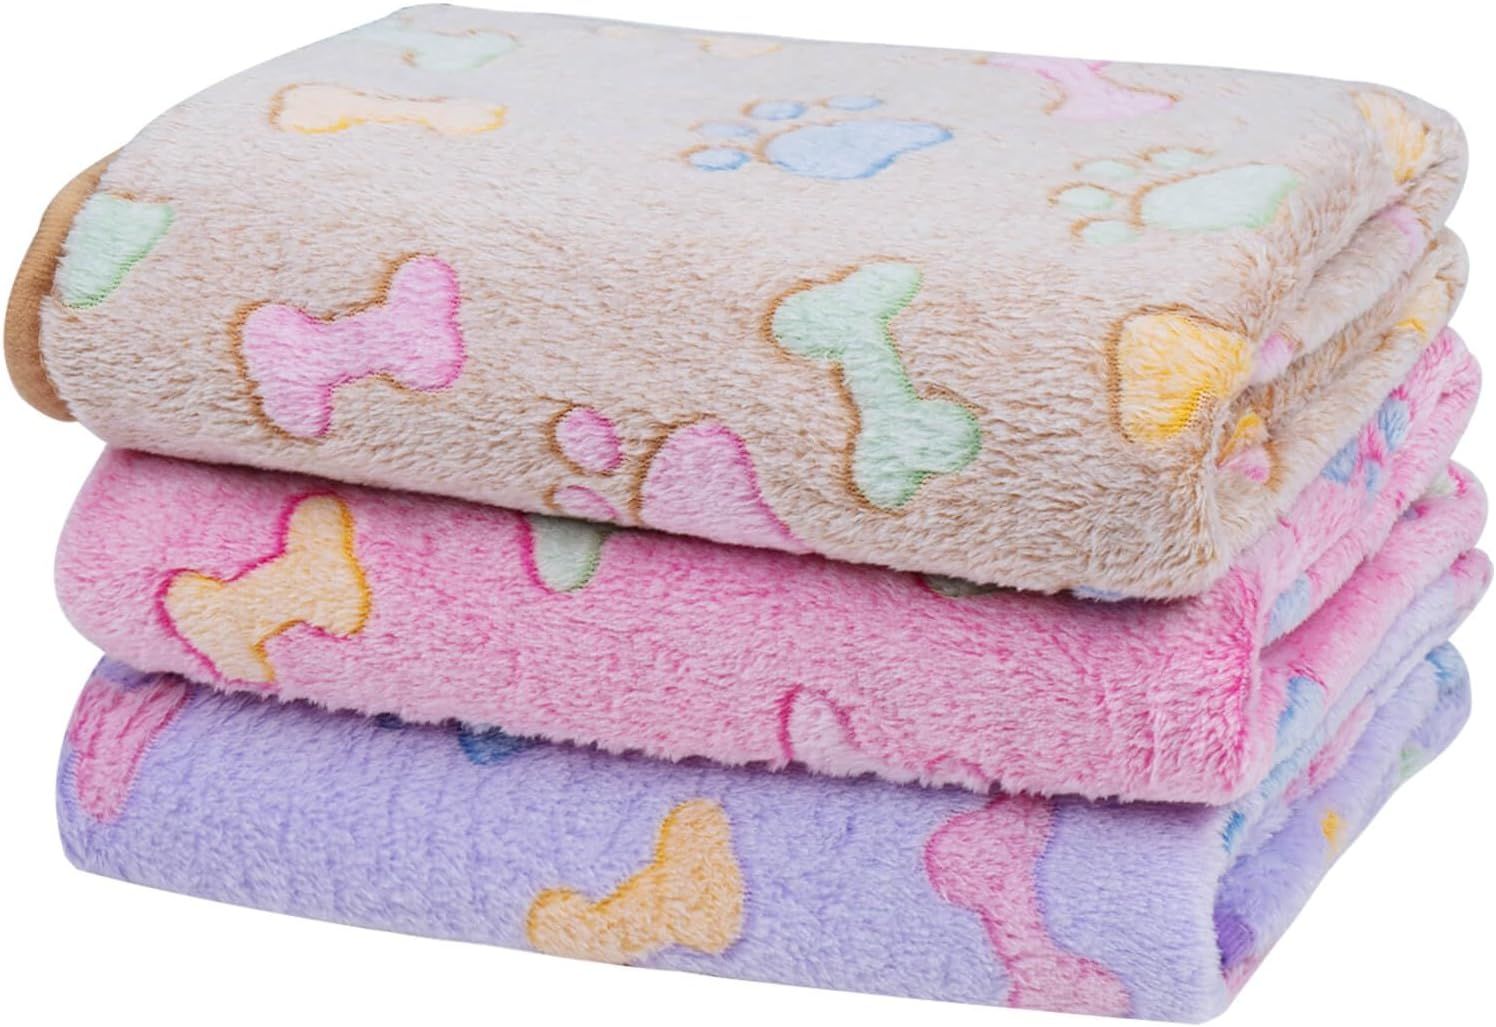 Dono 1 Pack 3 Dog Blanket Soft Fluffy Fleece Blanket for Small, Medium and Large Dogs - Paw Print Pink Pet Blanket Mat | Amazon (US)